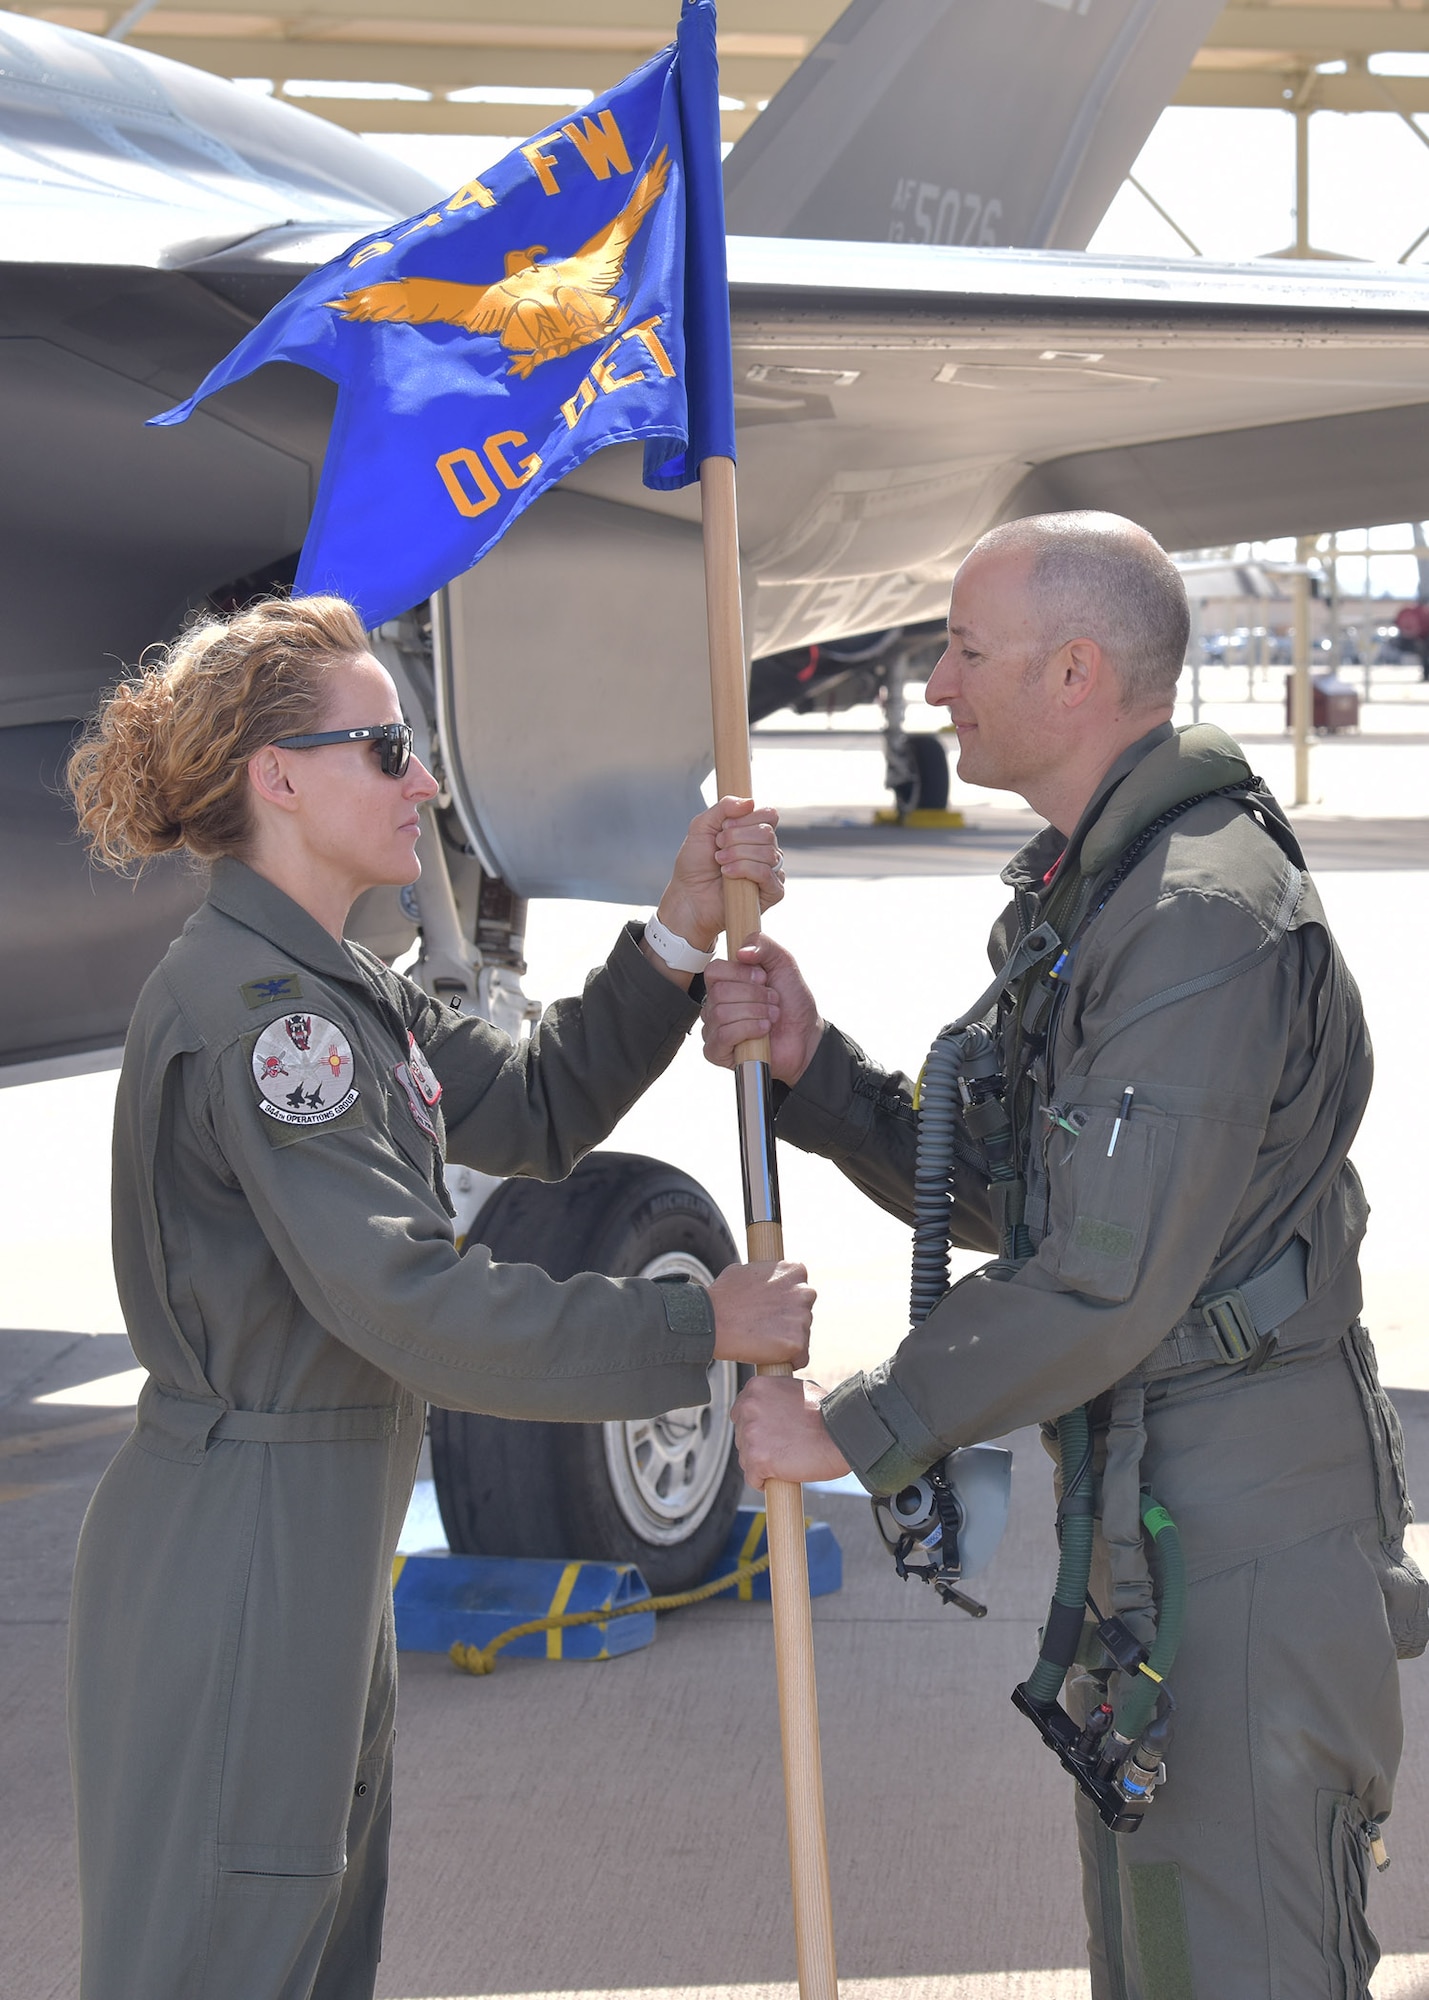 Due to COVID-19 social distancing requirements the 944th Operations Group Detachment 2 employed a creative approach to their recent leadership change by accomplishing an in-air change of command ceremony March 27 at Luke Air Force Base, Arizona.